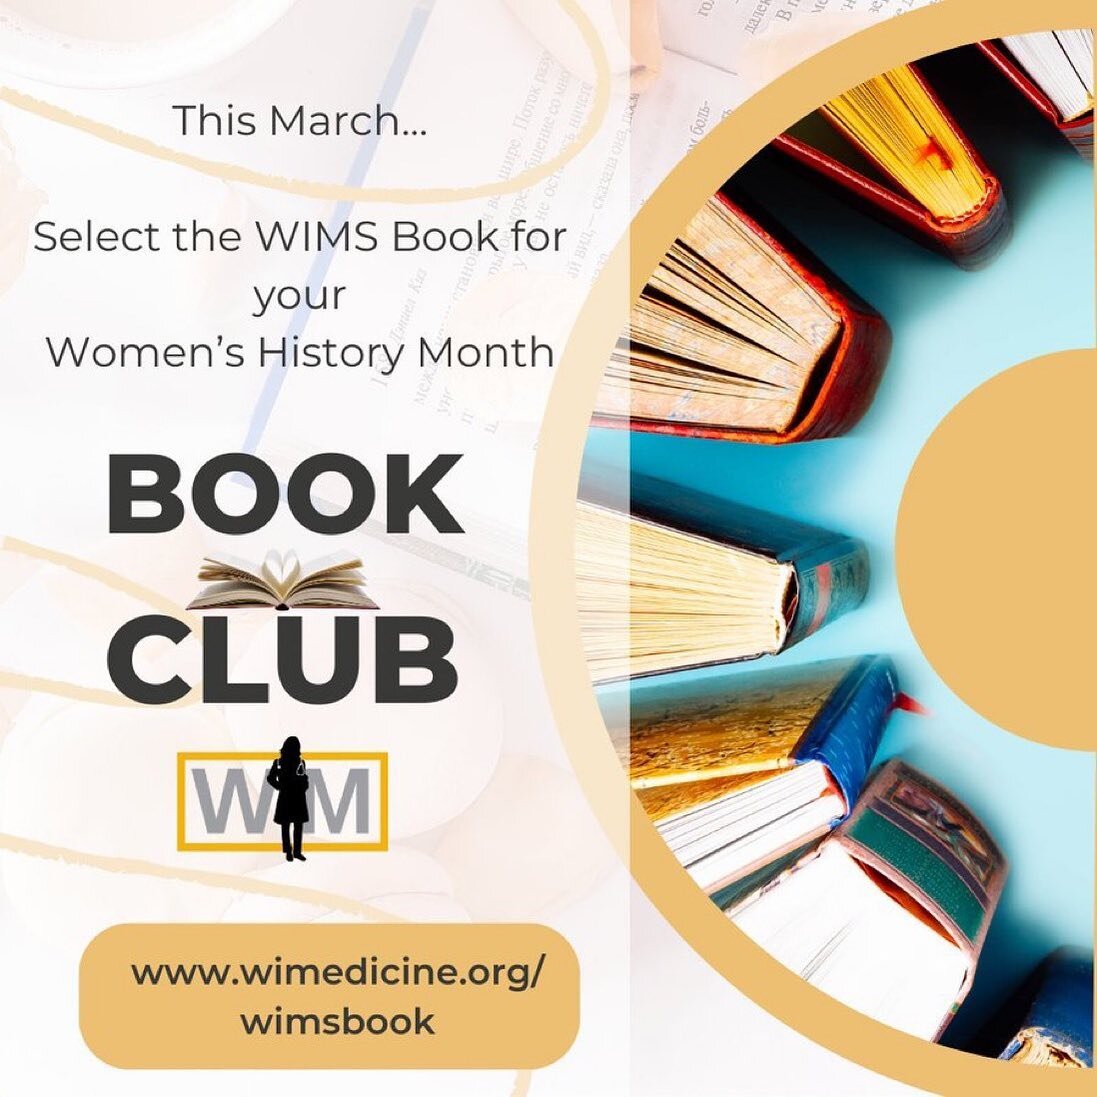 Women's History Month is a month away! 

Now is the perfect time to consider a group order if the #WIMSbook for your women in medicine group, your department/division, or your book club! 

More information about bulk orders and pricing: wimedicine.or